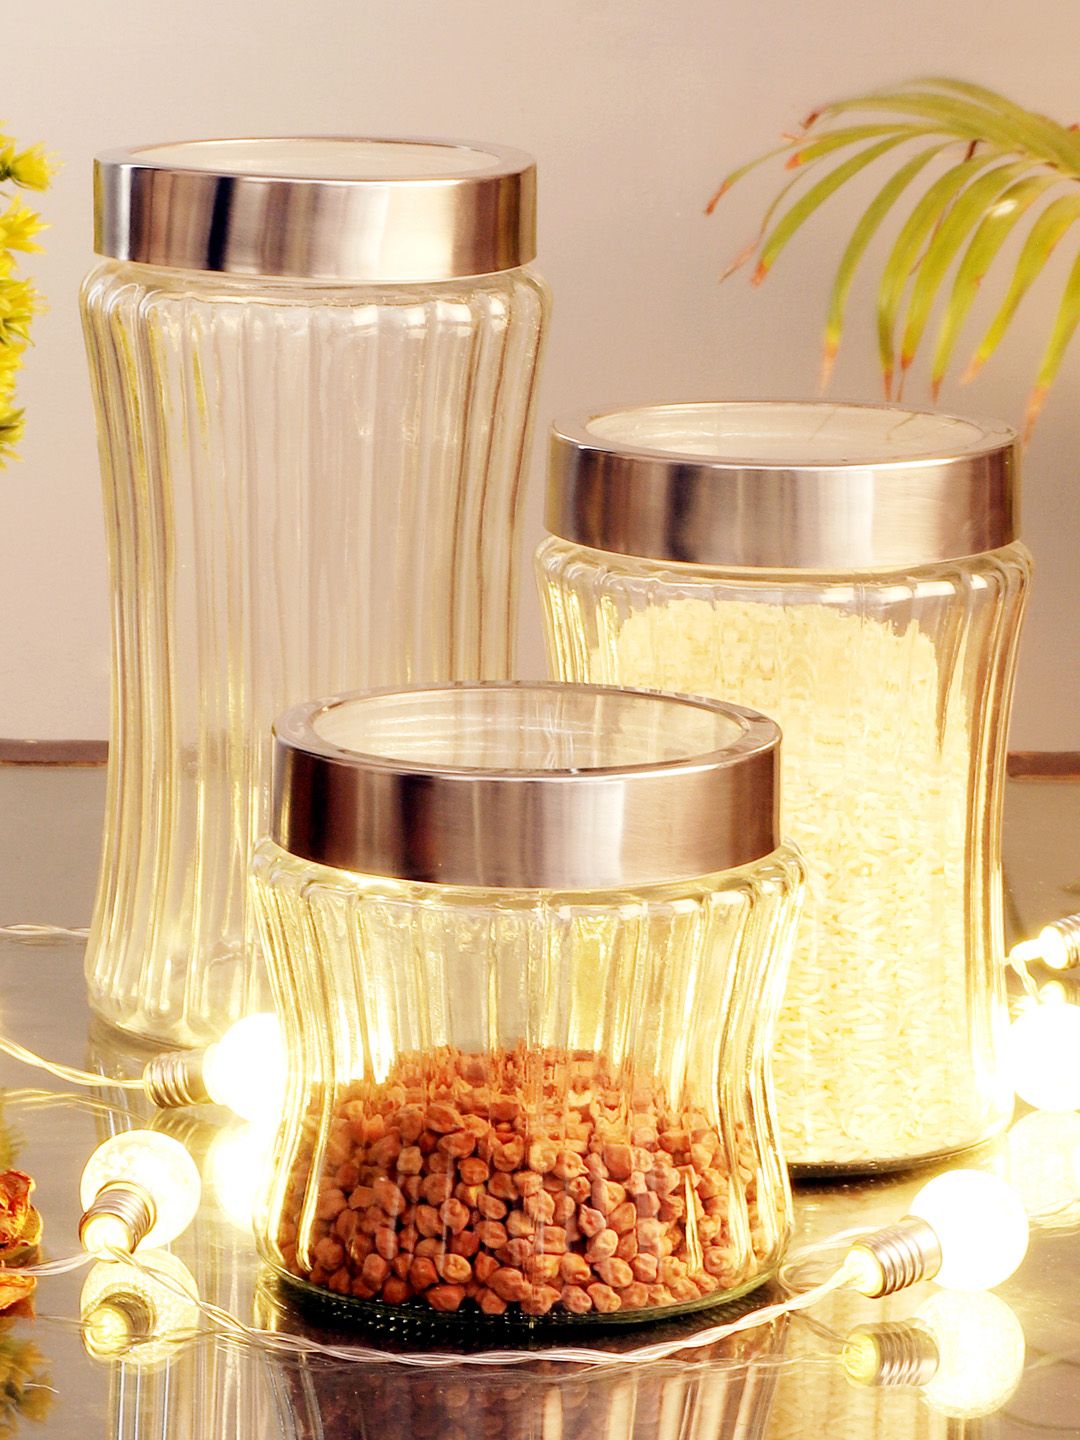 ceradeco Set Of 3 Transparent & Silver-Toned Storage Jars With Lids Price in India